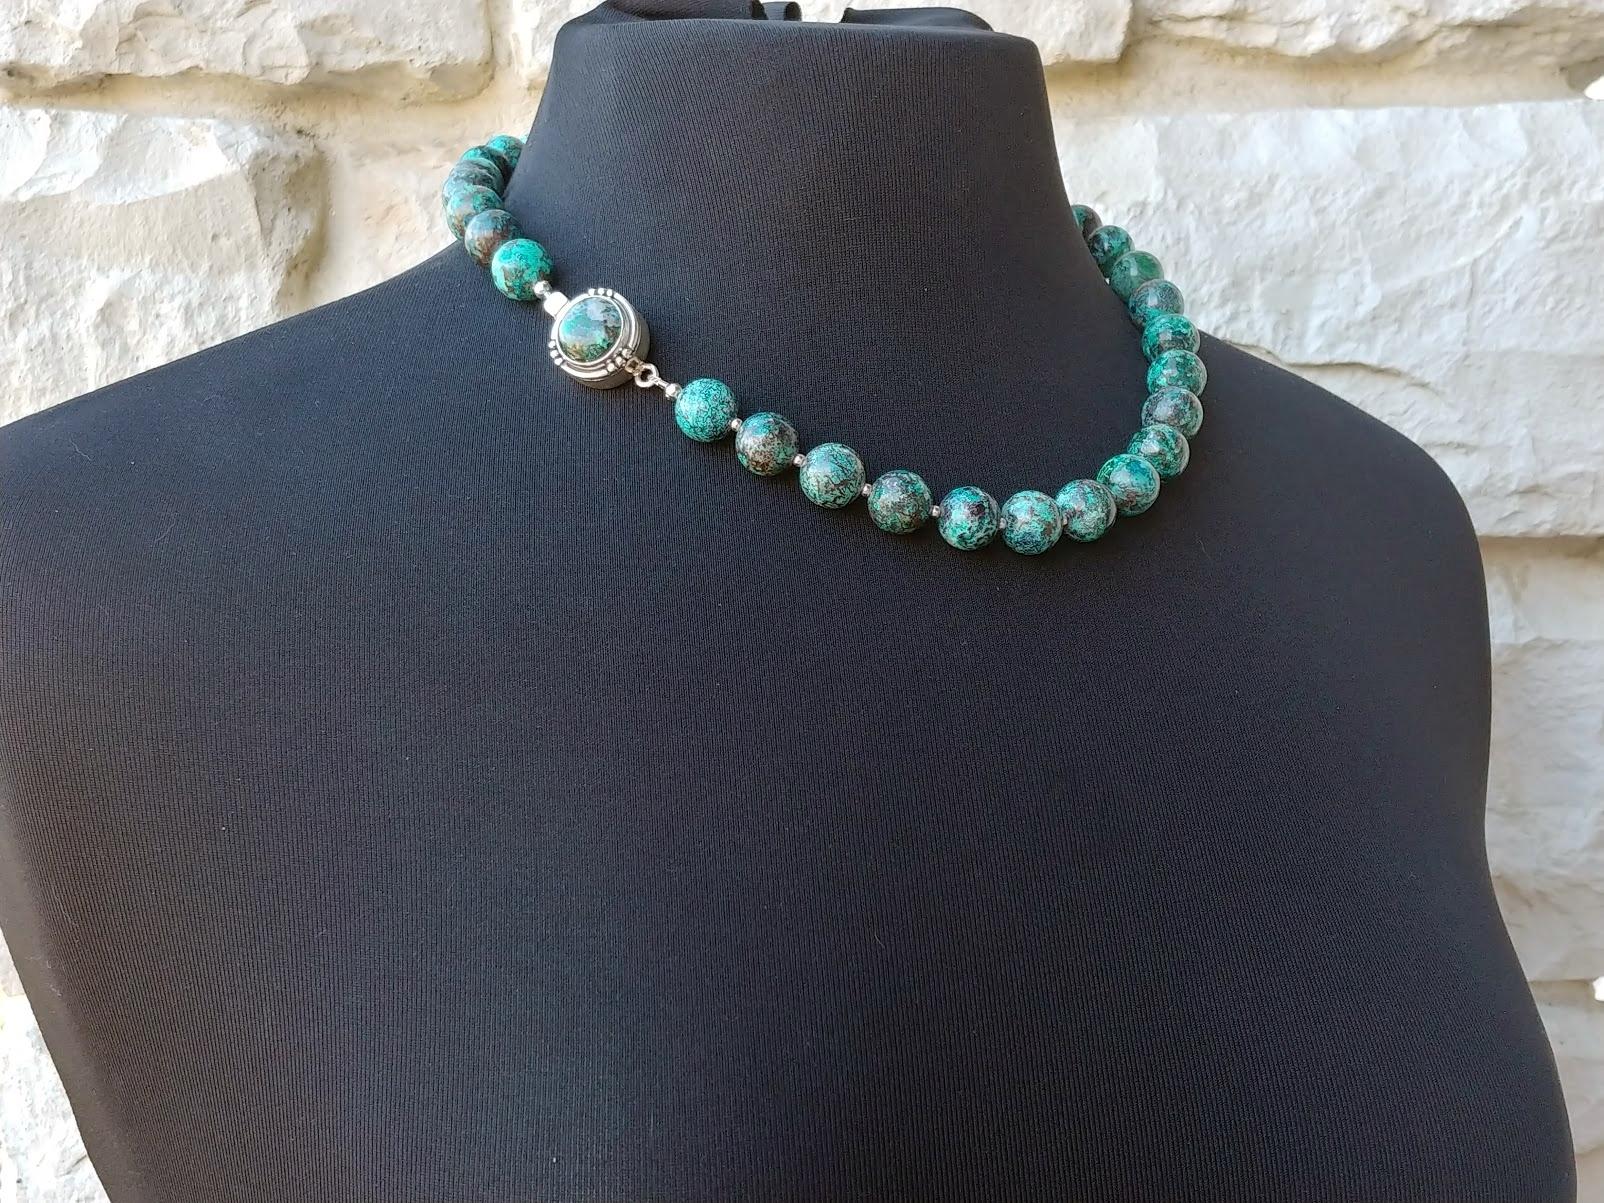 The necklace is 19.5 inches (49.5 cm) long, and the smooth round beads are 12 mm in size.
Sharp and vibrant in coloring, dark and light blue, turquoise. Such a color and gradation make it seem like a bead, but no—it's like a planet! In bright